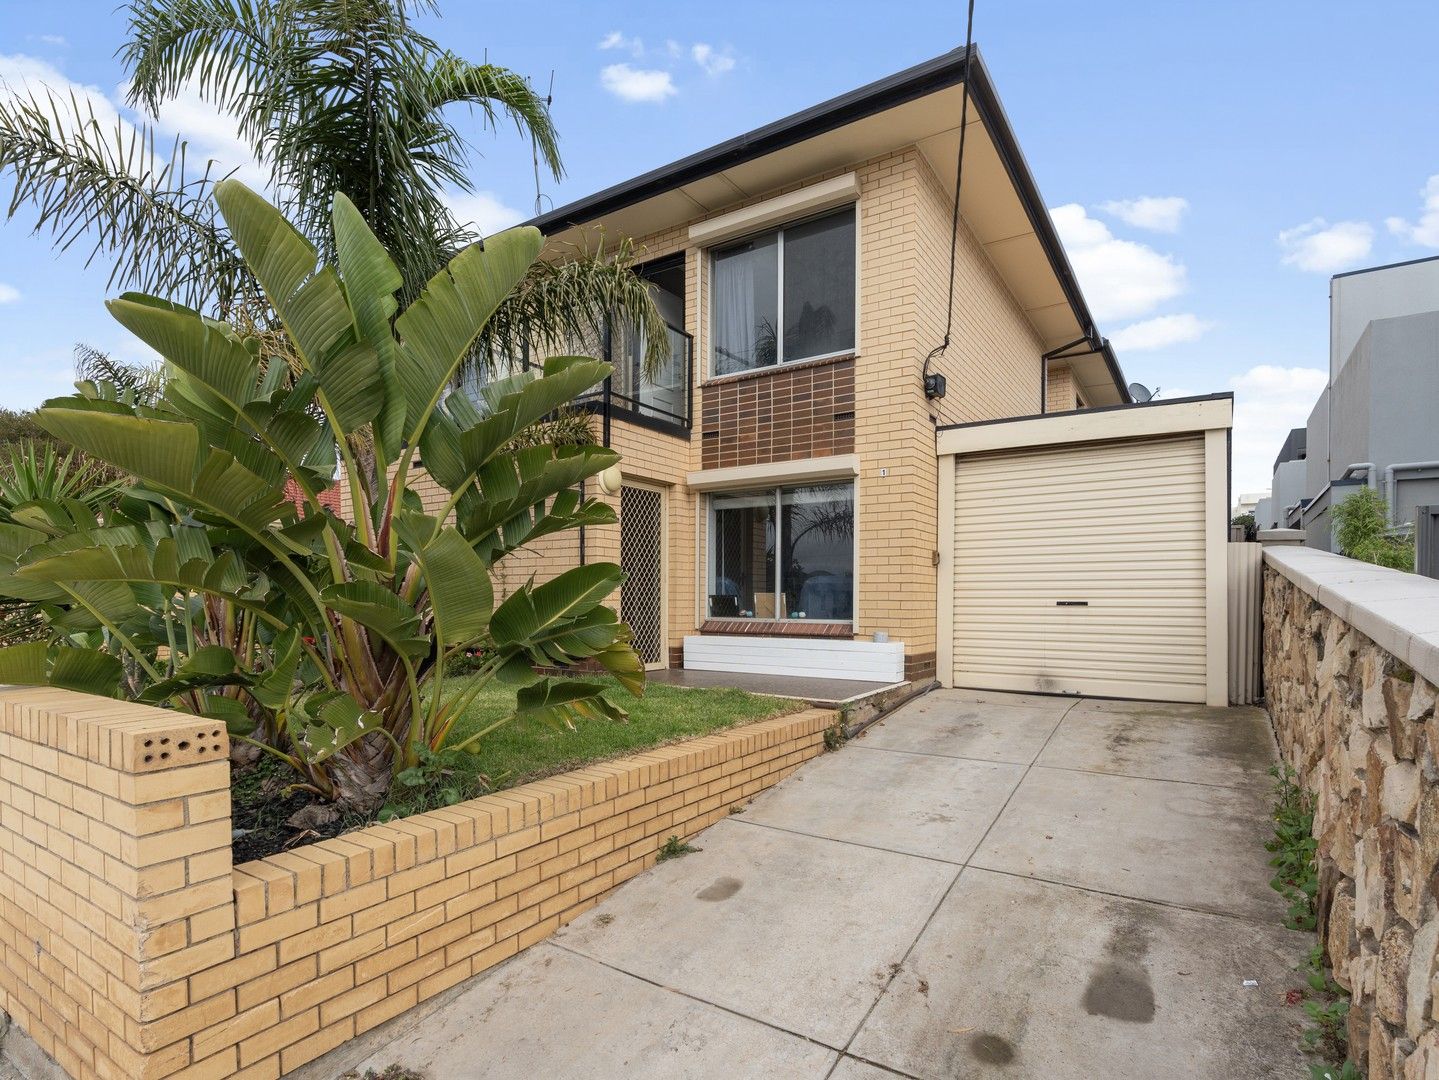 2 bedrooms Apartment / Unit / Flat in 1/317 Military Rd SEMAPHORE PARK SA, 5019